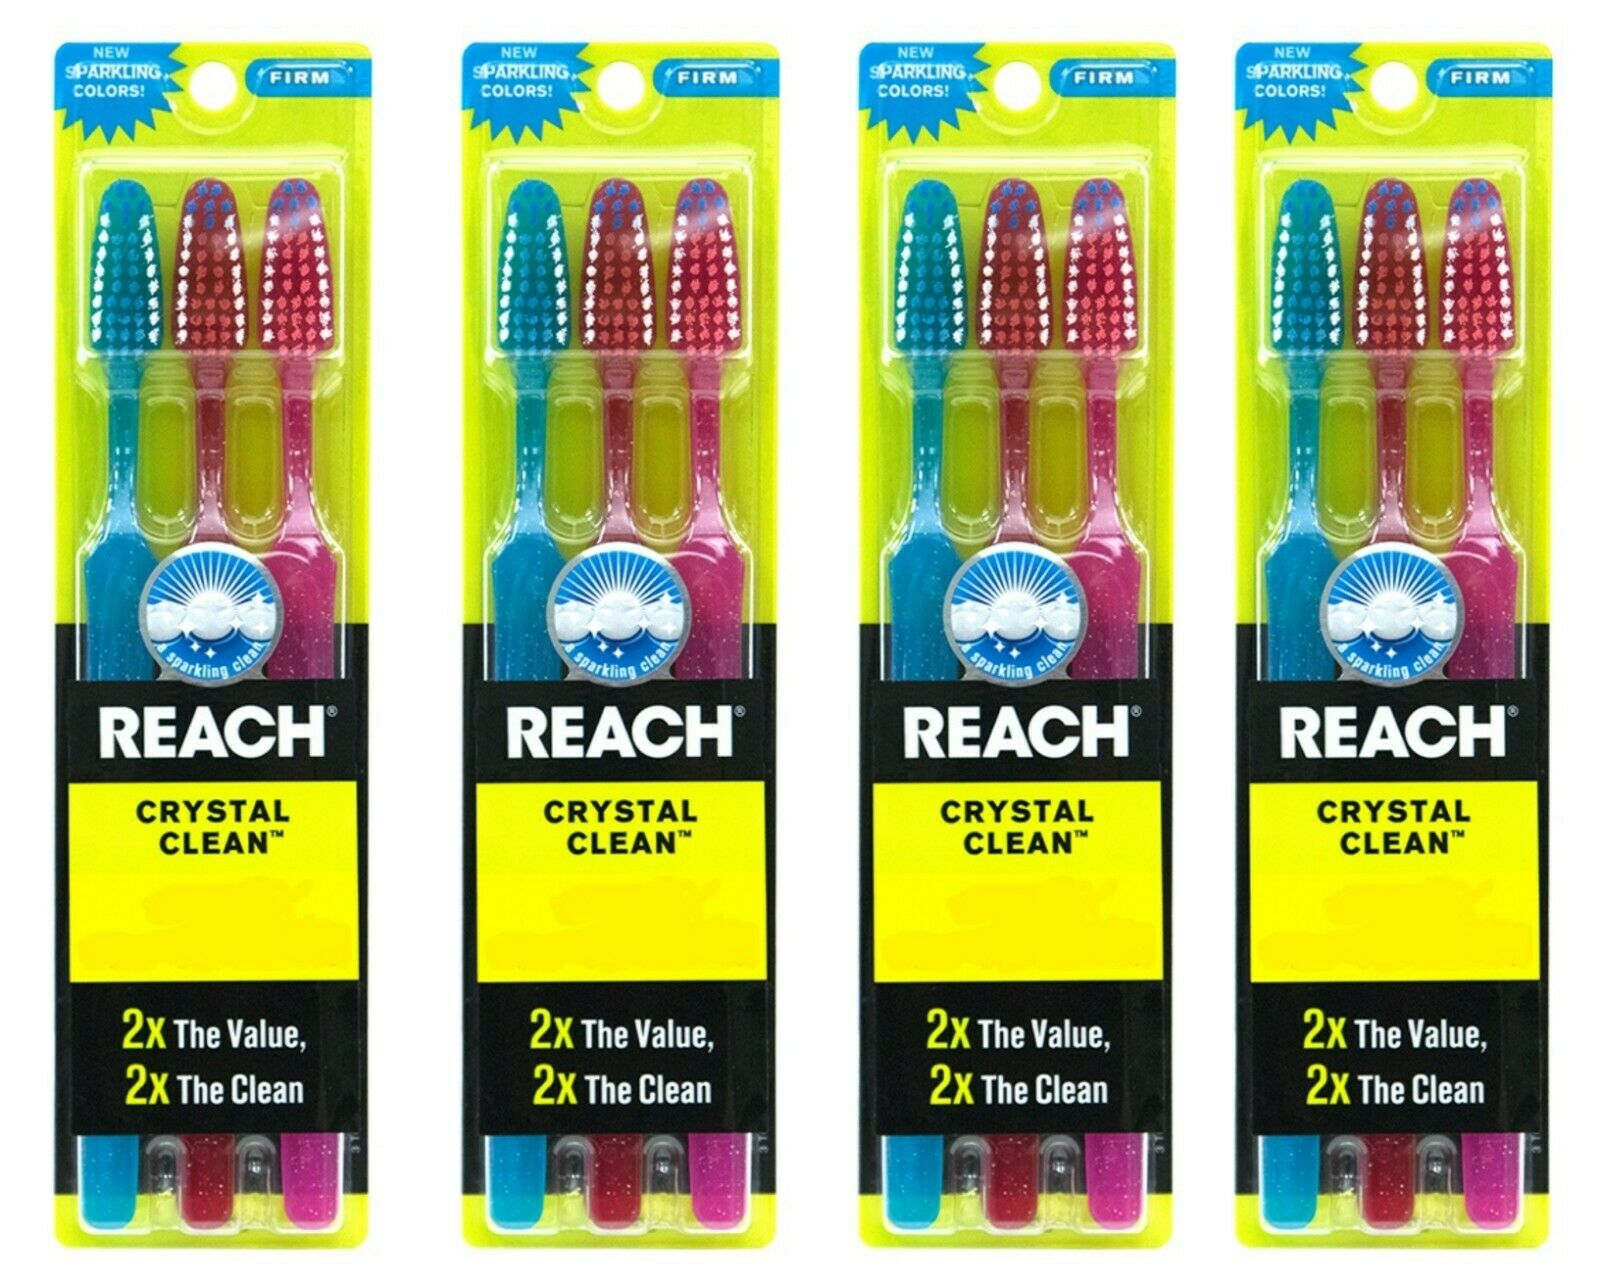 12 Reach Toothbrush Extra Clean Firm Bristles Hard - Free Shipping